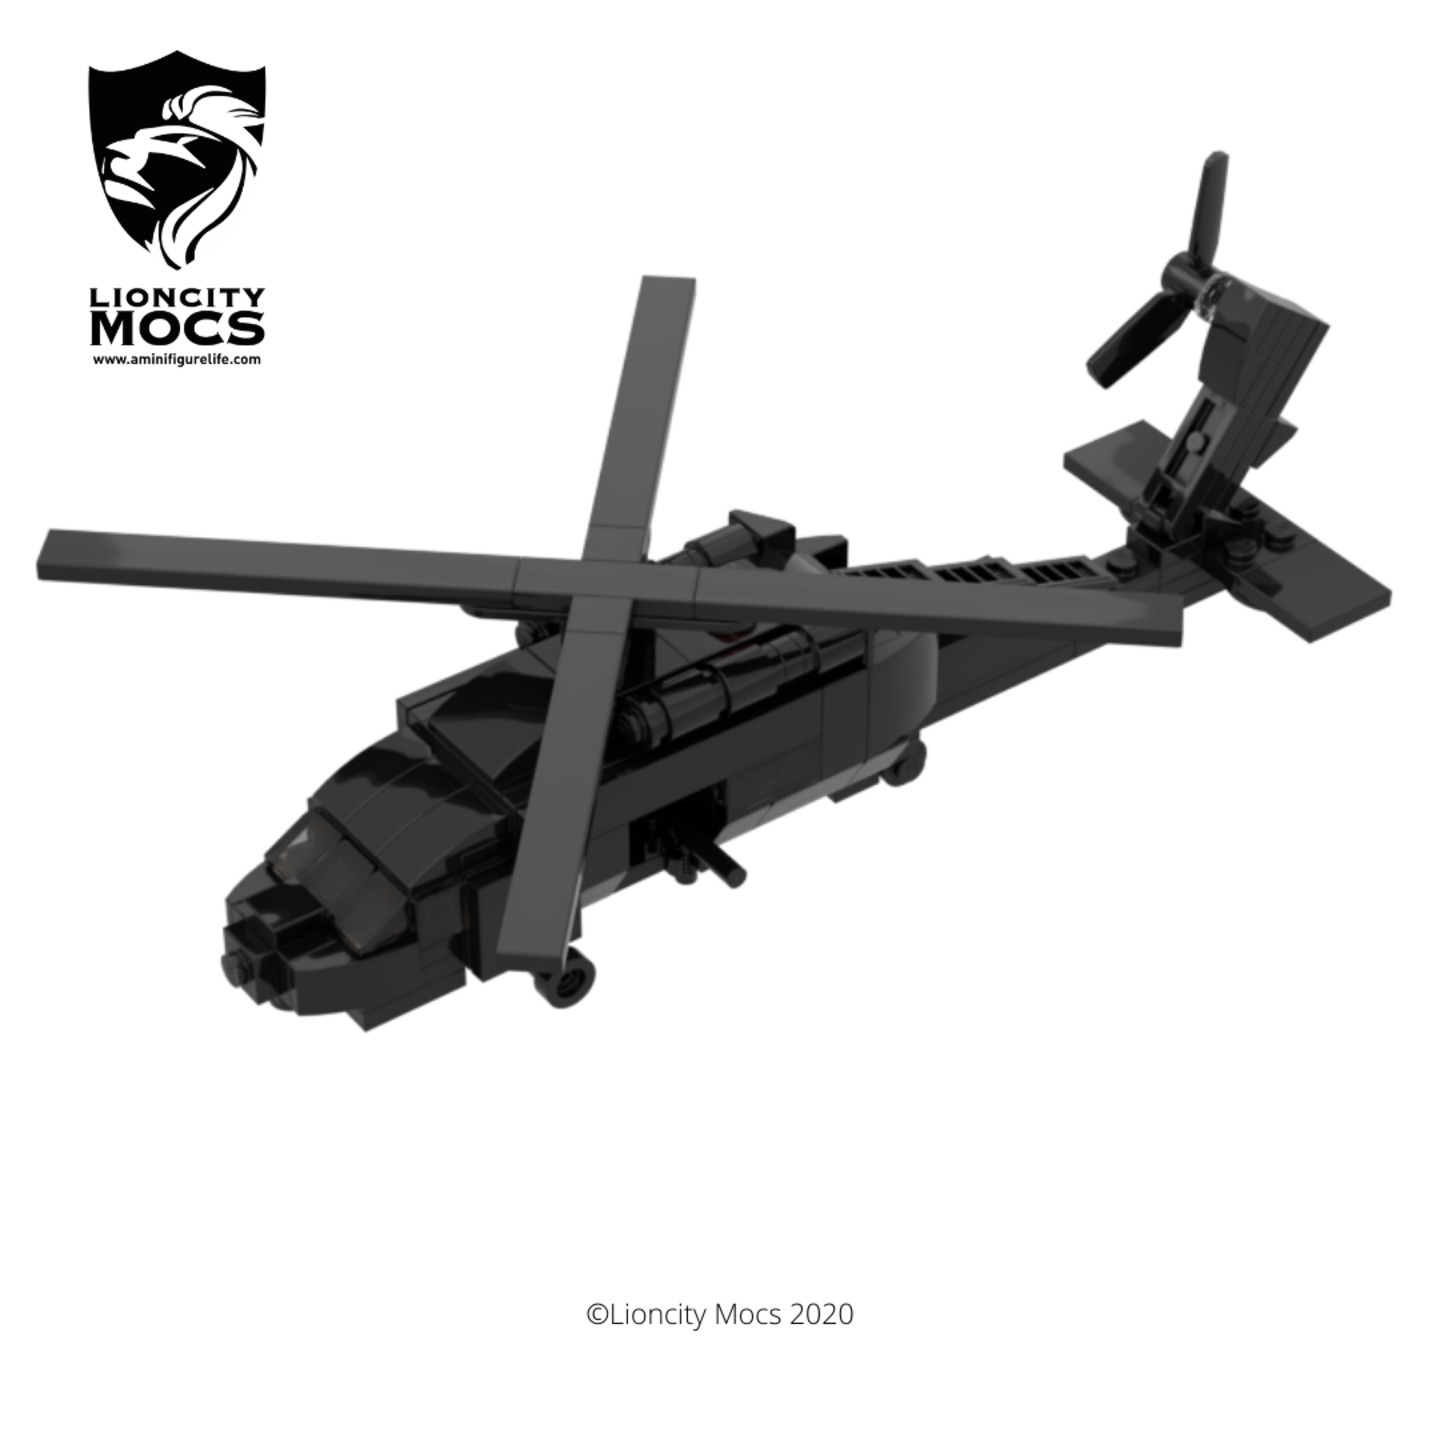 [PDF Instructions Only] UH-60 Blackhawk Helicopter Mini